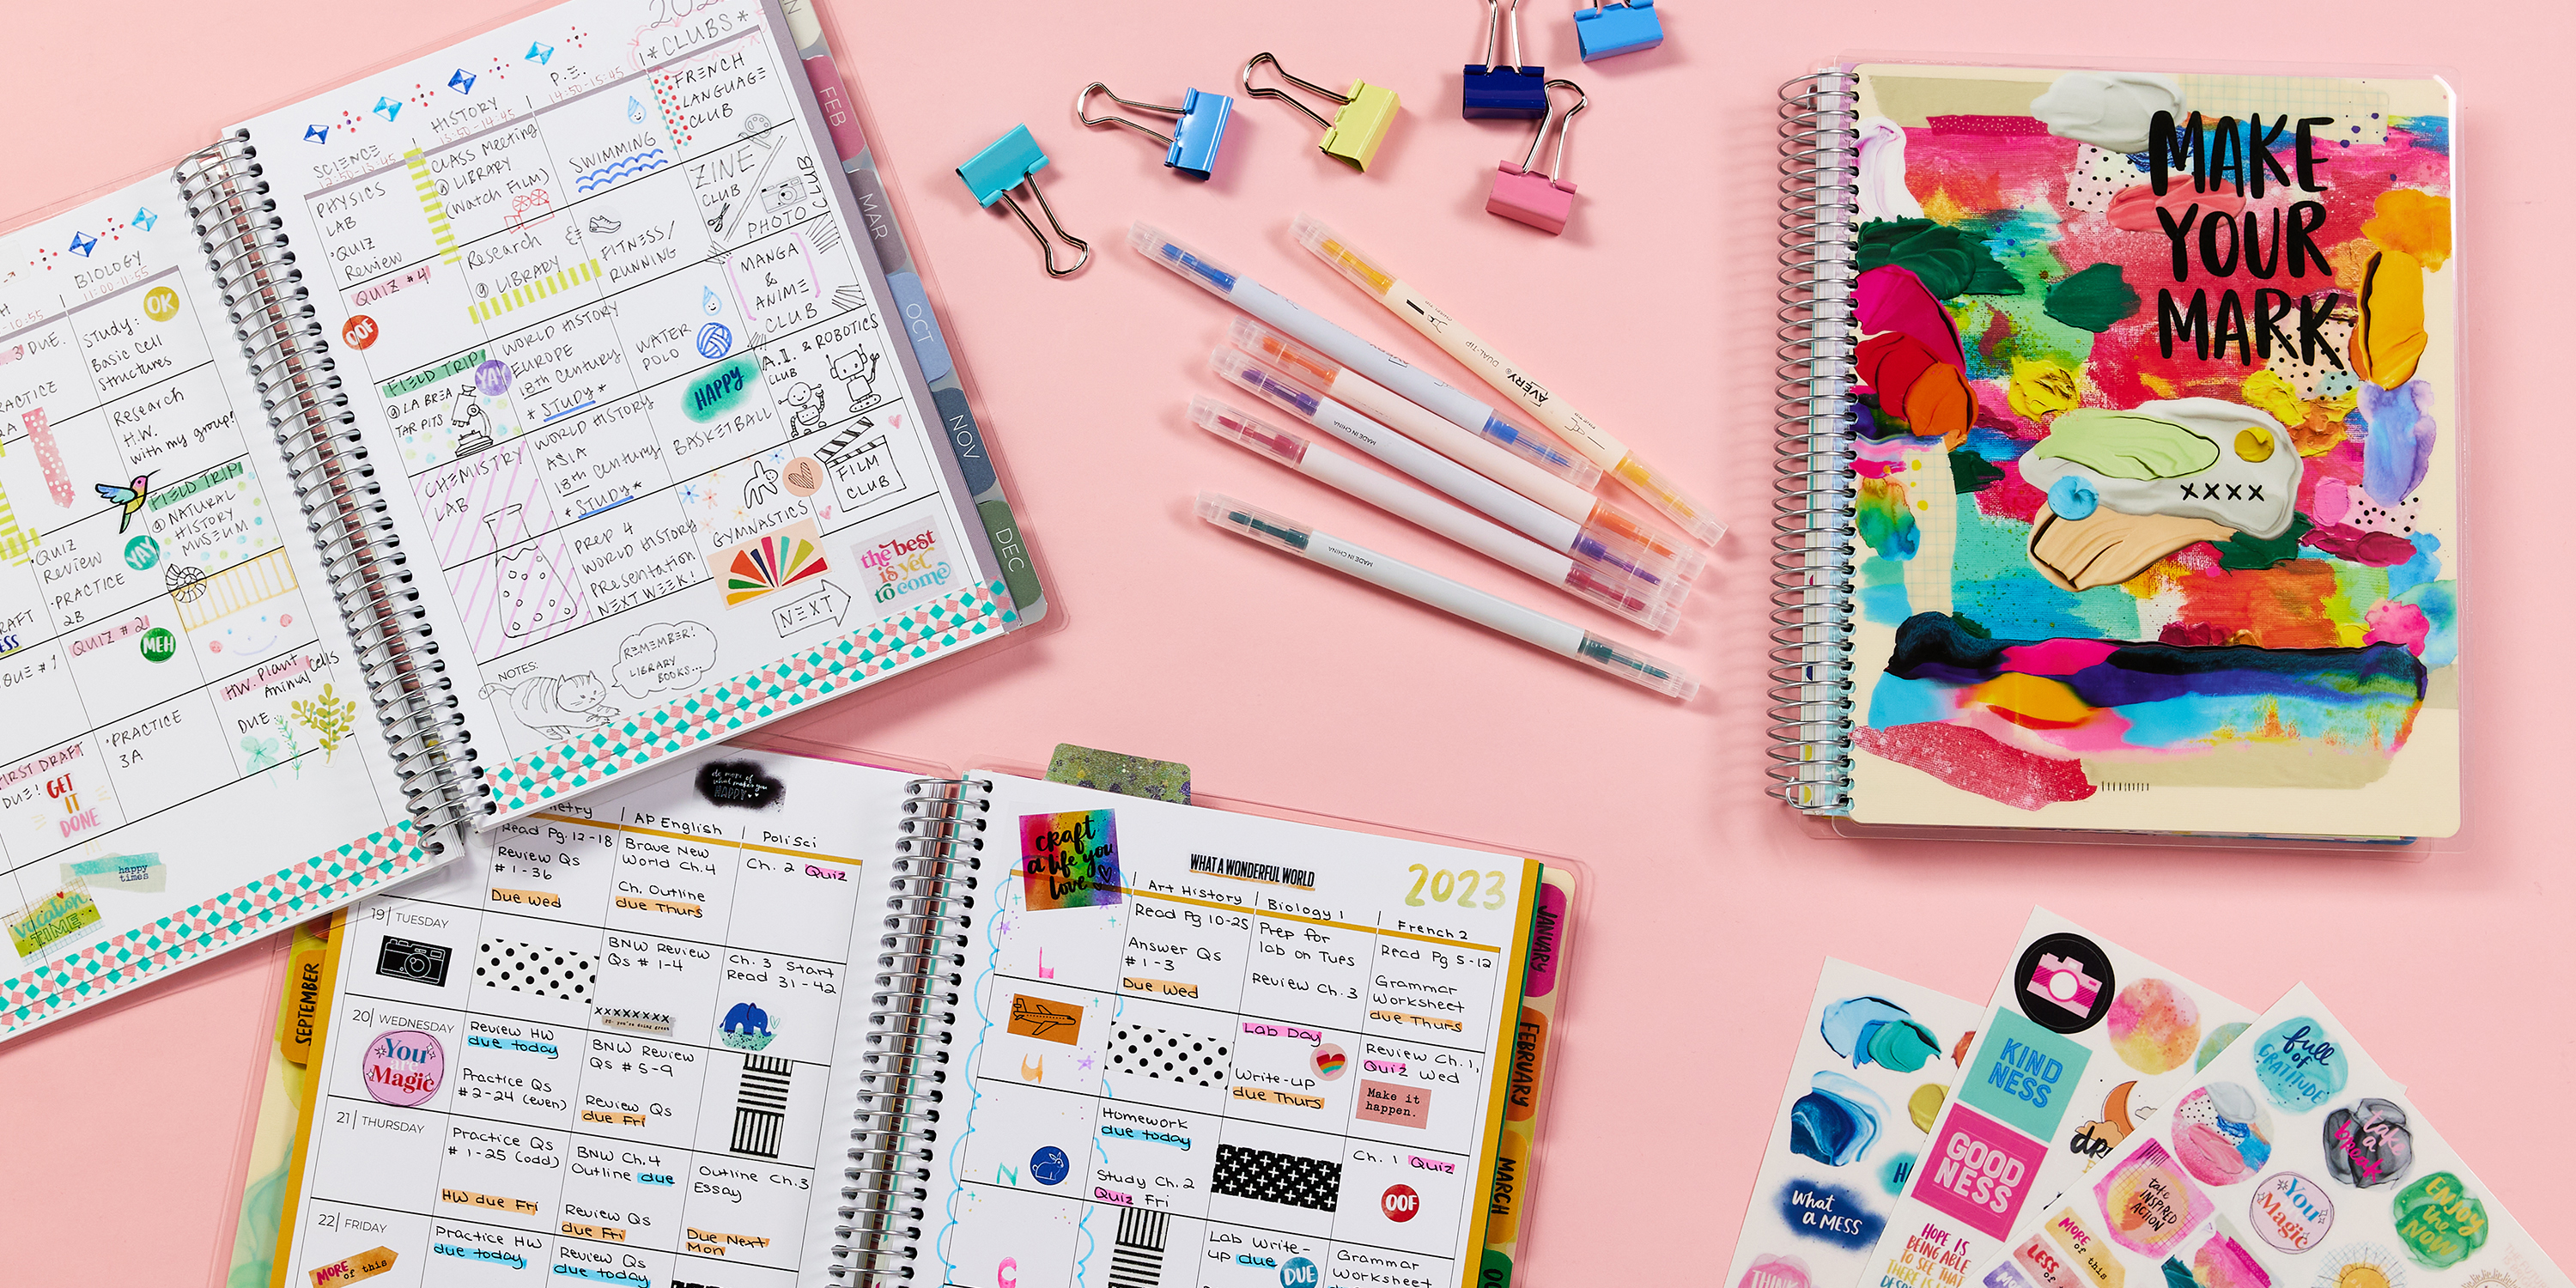 Academic planners are planners dated from July to June to follow the school year. This image shows three Avery academic planners on a pink background surrounded by wet-erase markers, candy-colored binder clips and Avery planner stickers.